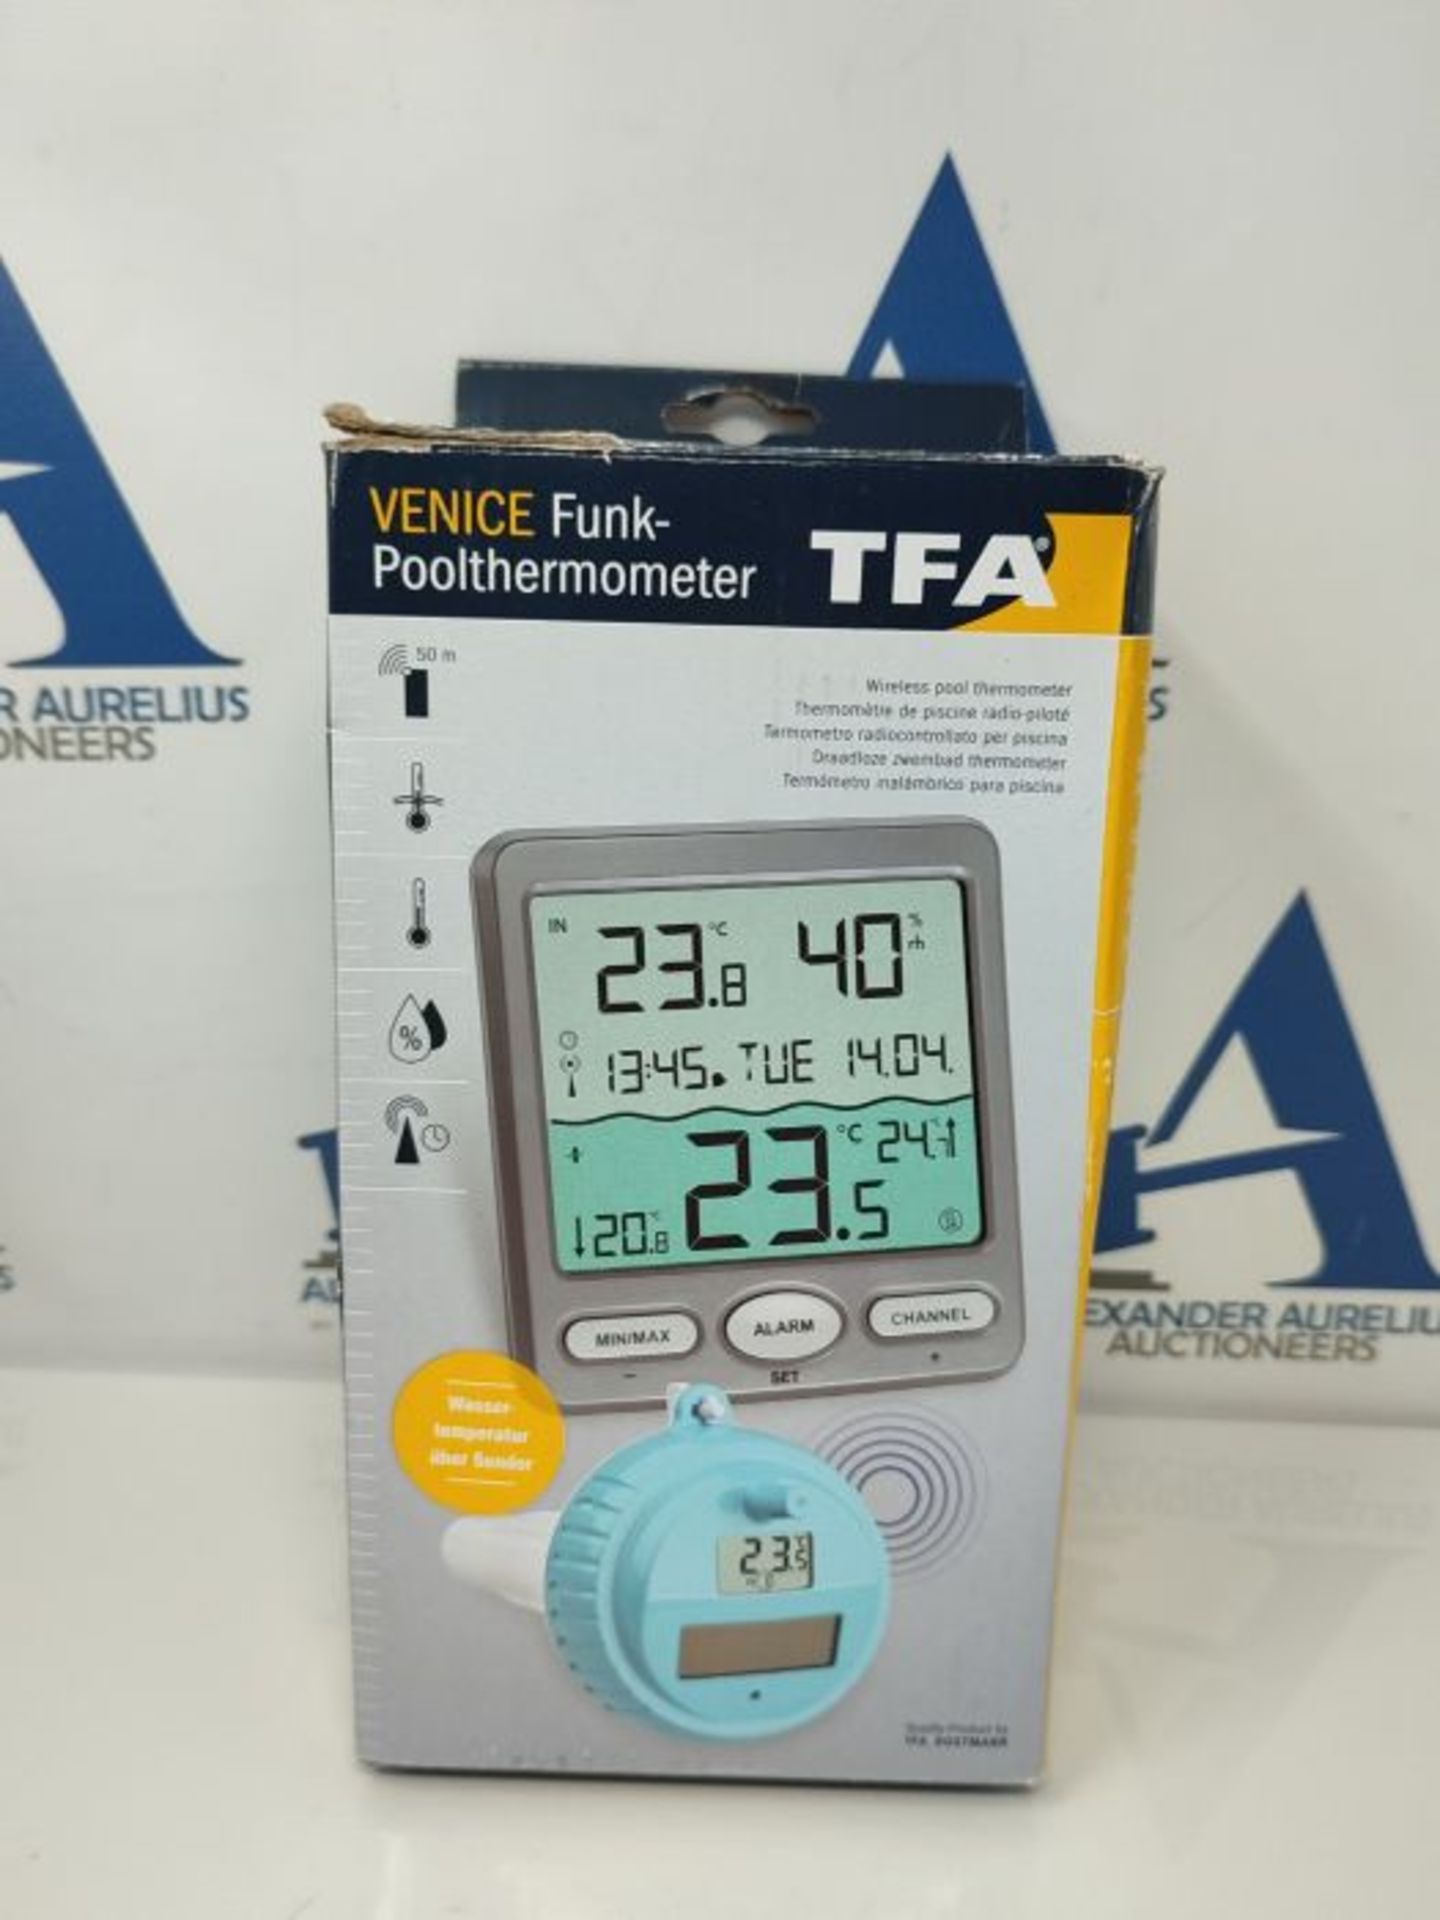 TFA-Dostmann Pool Thermometer VENICE 30,3056,10, for Monitoring of Temperature of Wate - Image 2 of 3